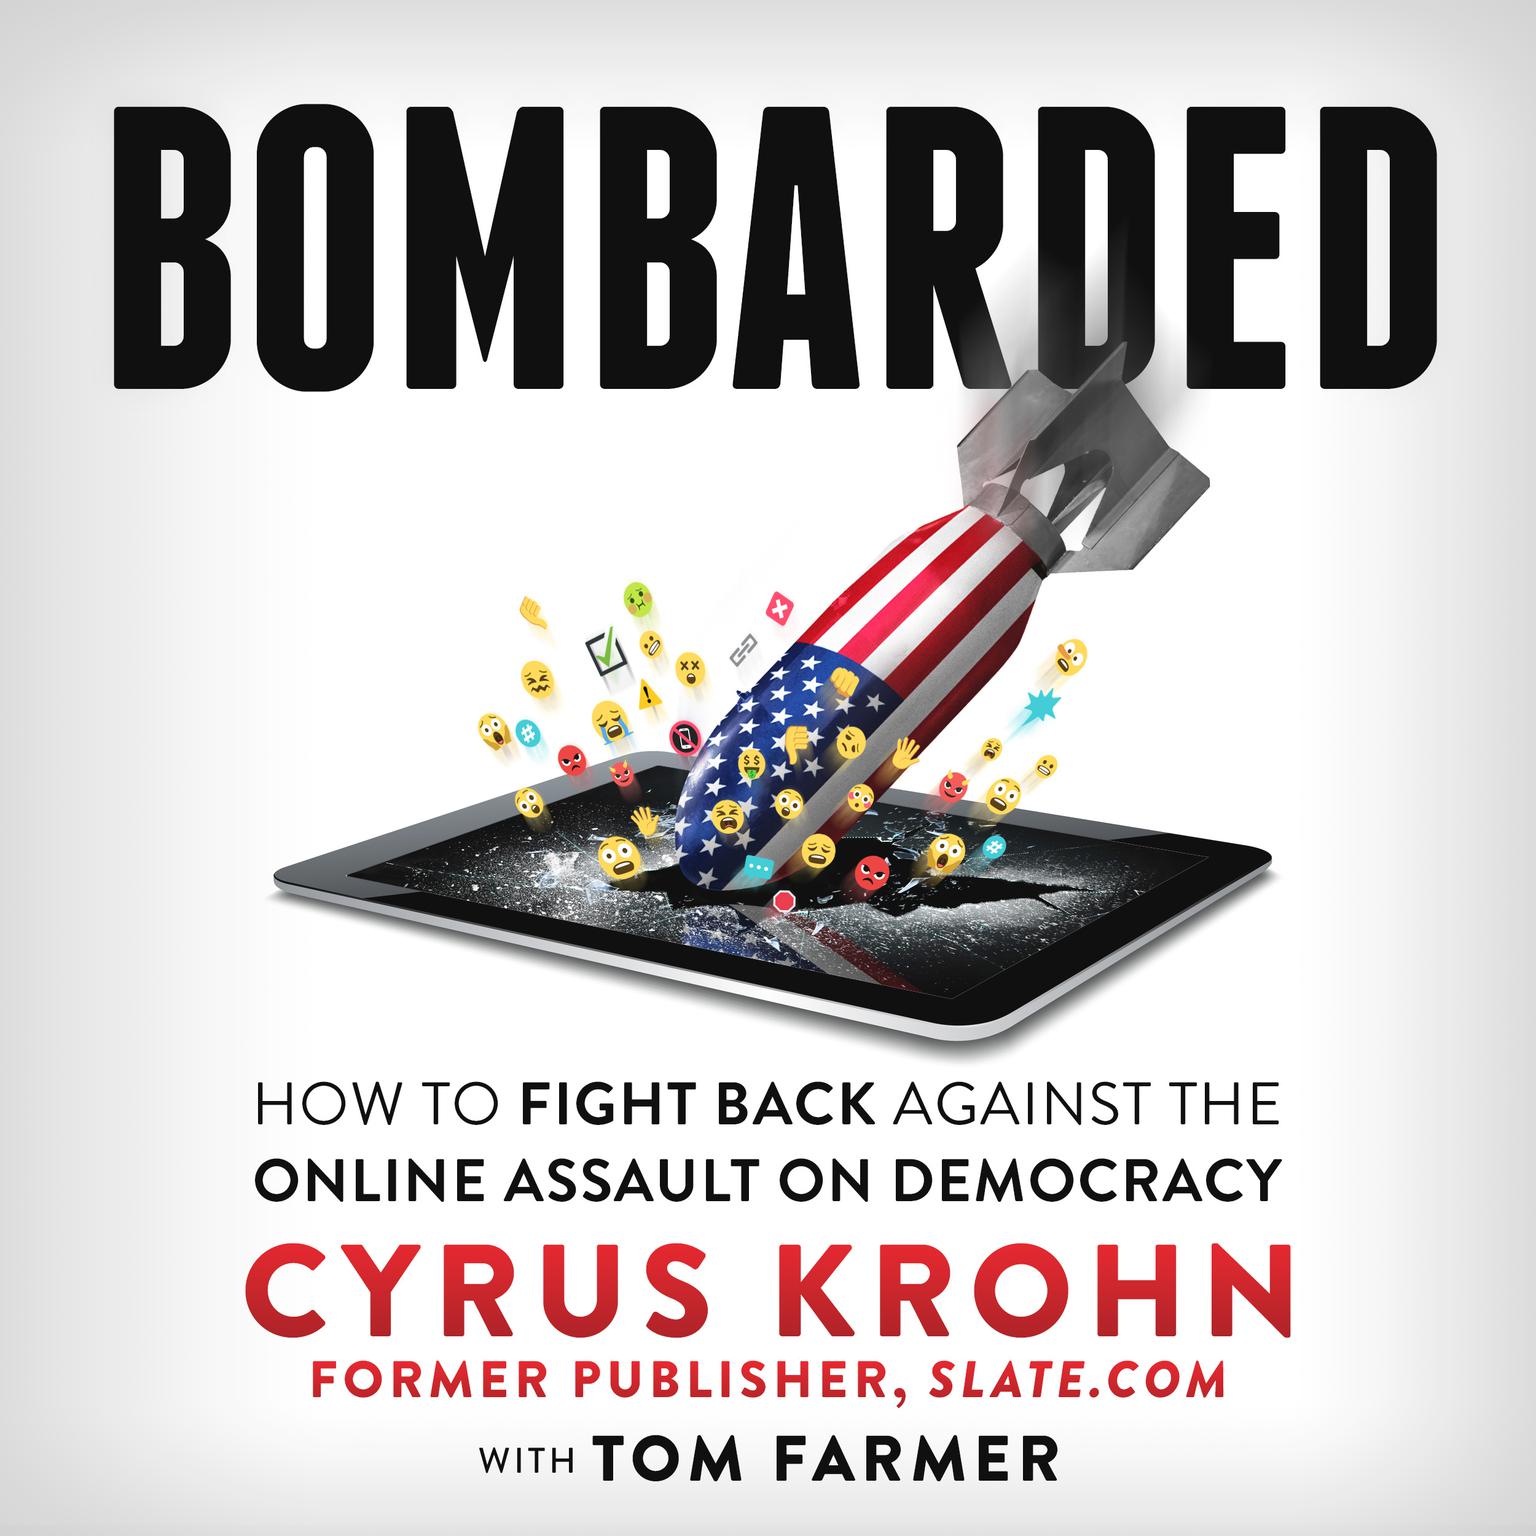 Bombarded: How to Fight Back Against the Online Assault on Democracy Audiobook, by Cyrus Krohn